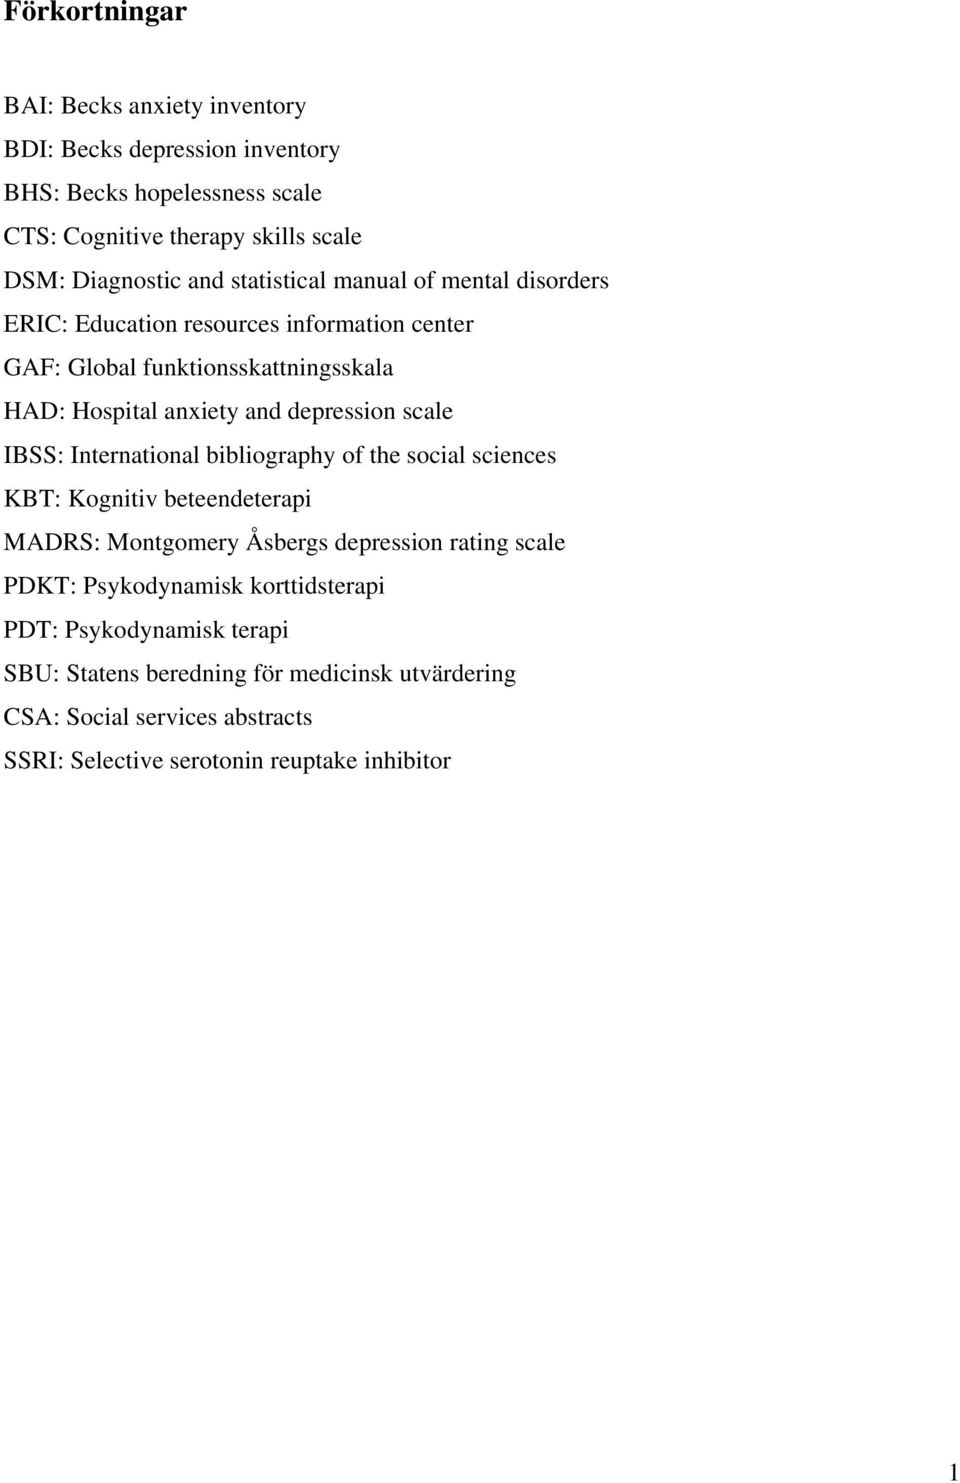 scale IBSS: International bibliography of the social sciences KBT: Kognitiv beteendeterapi MADRS: Montgomery Åsbergs depression rating scale PDKT: Psykodynamisk